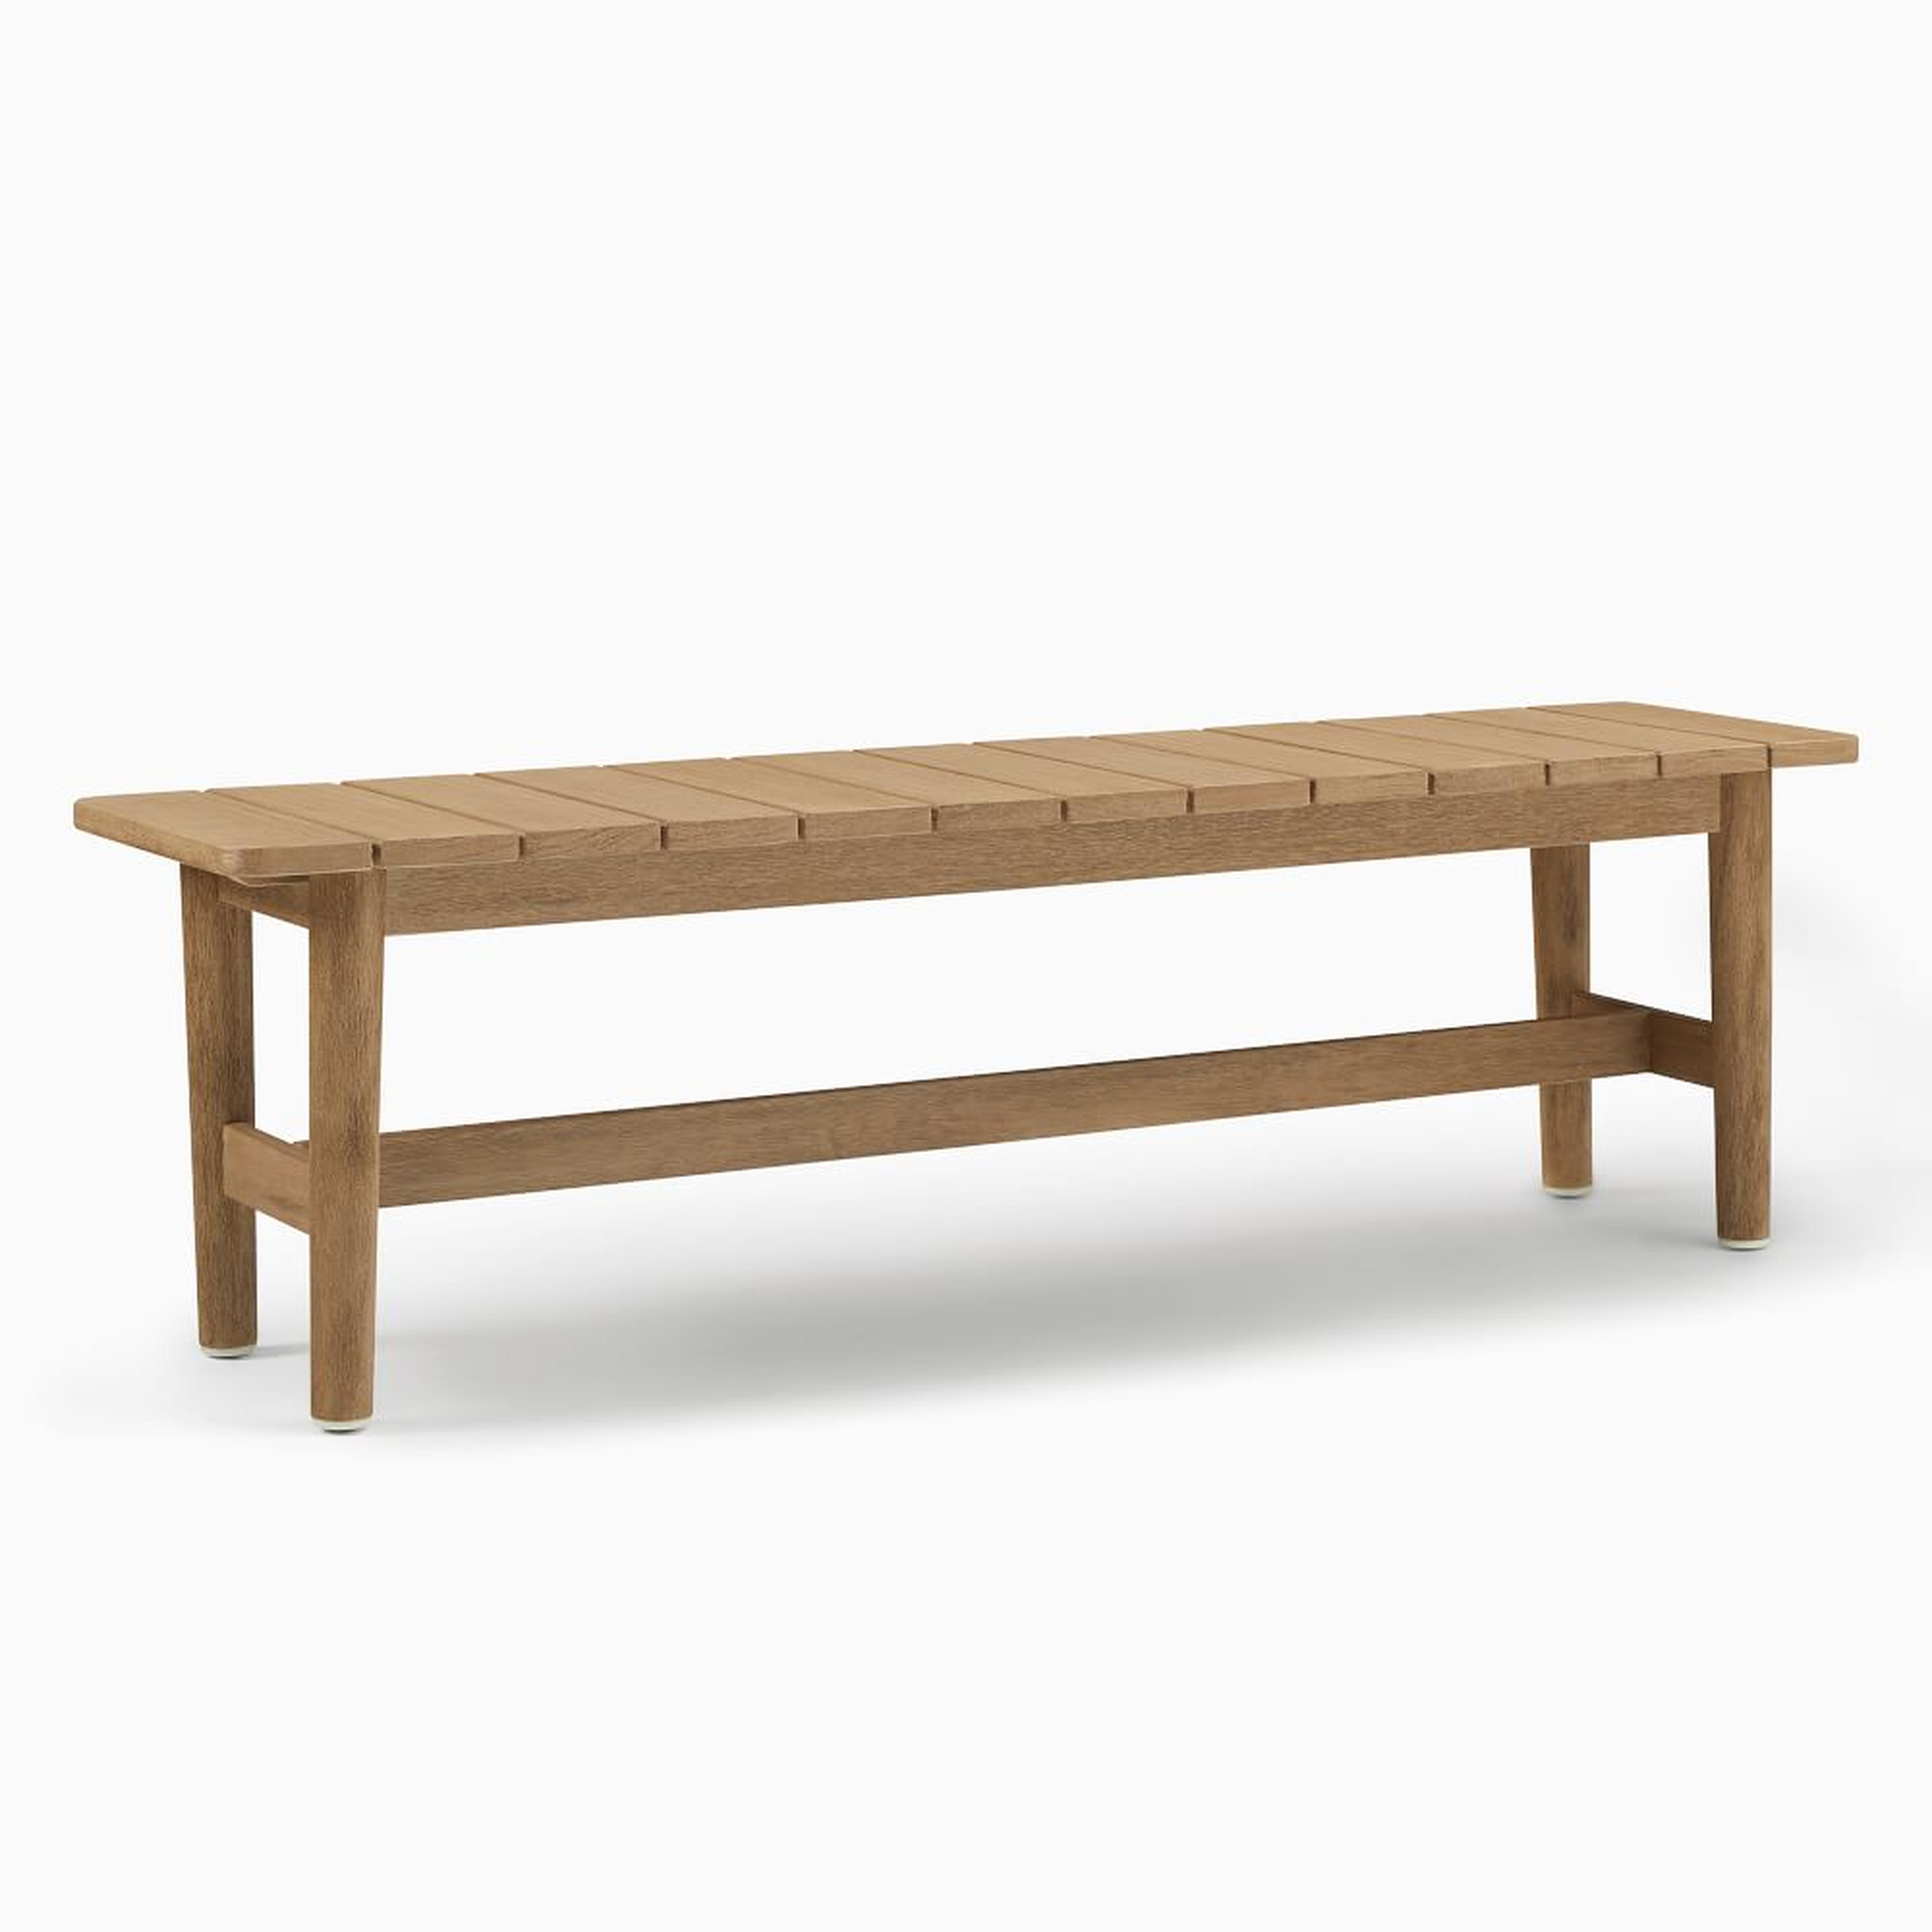 Hargrove Outdoor Dining Bench, 64 Inches, Reef - West Elm